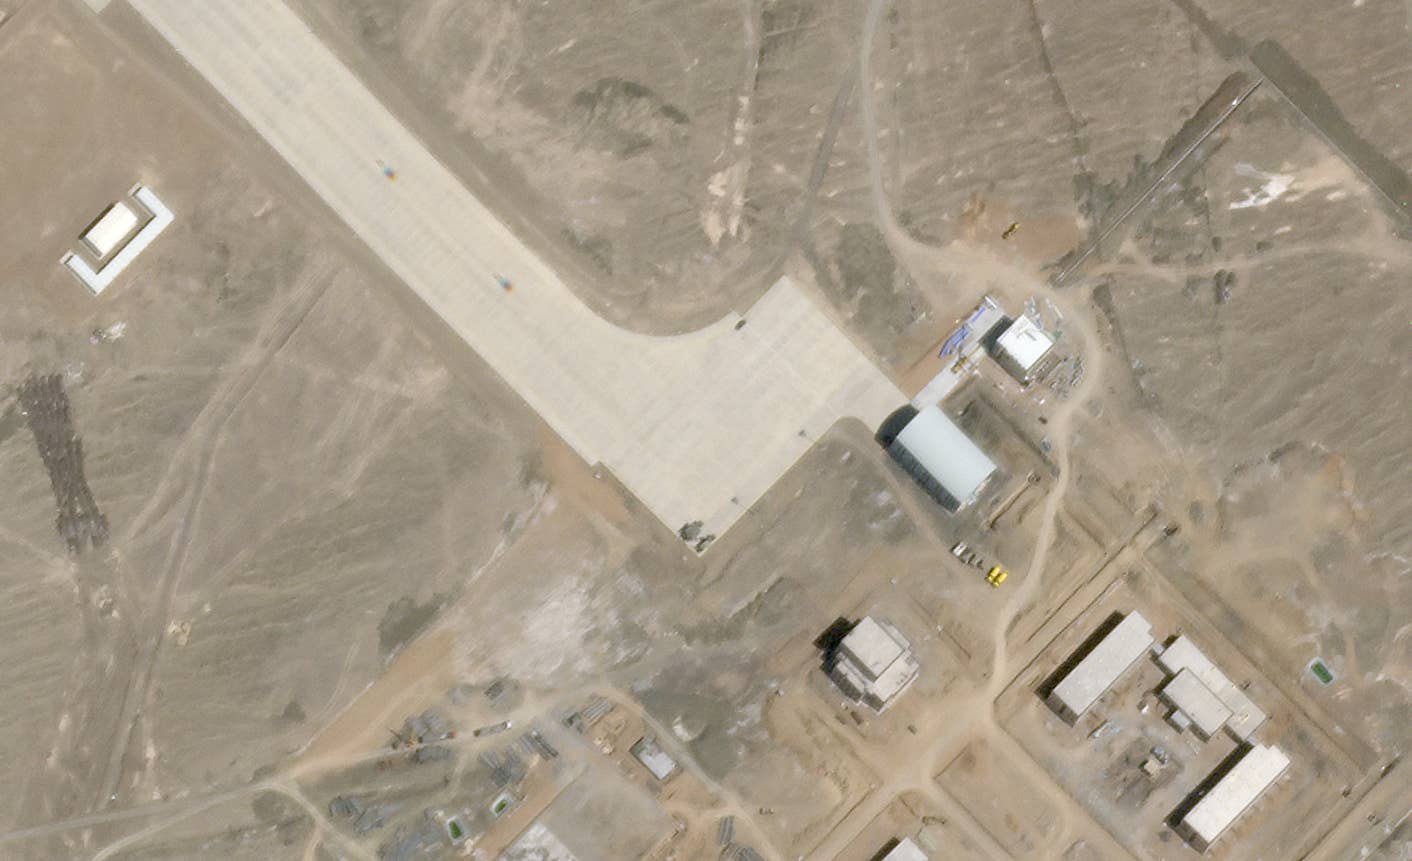 A close-up look at the main apron area and its immediate surroundings. <em>PHOTO © 2022 PLANET LABS INC. ALL RIGHTS RESERVED. REPRINTED BY PERMISSION</em>